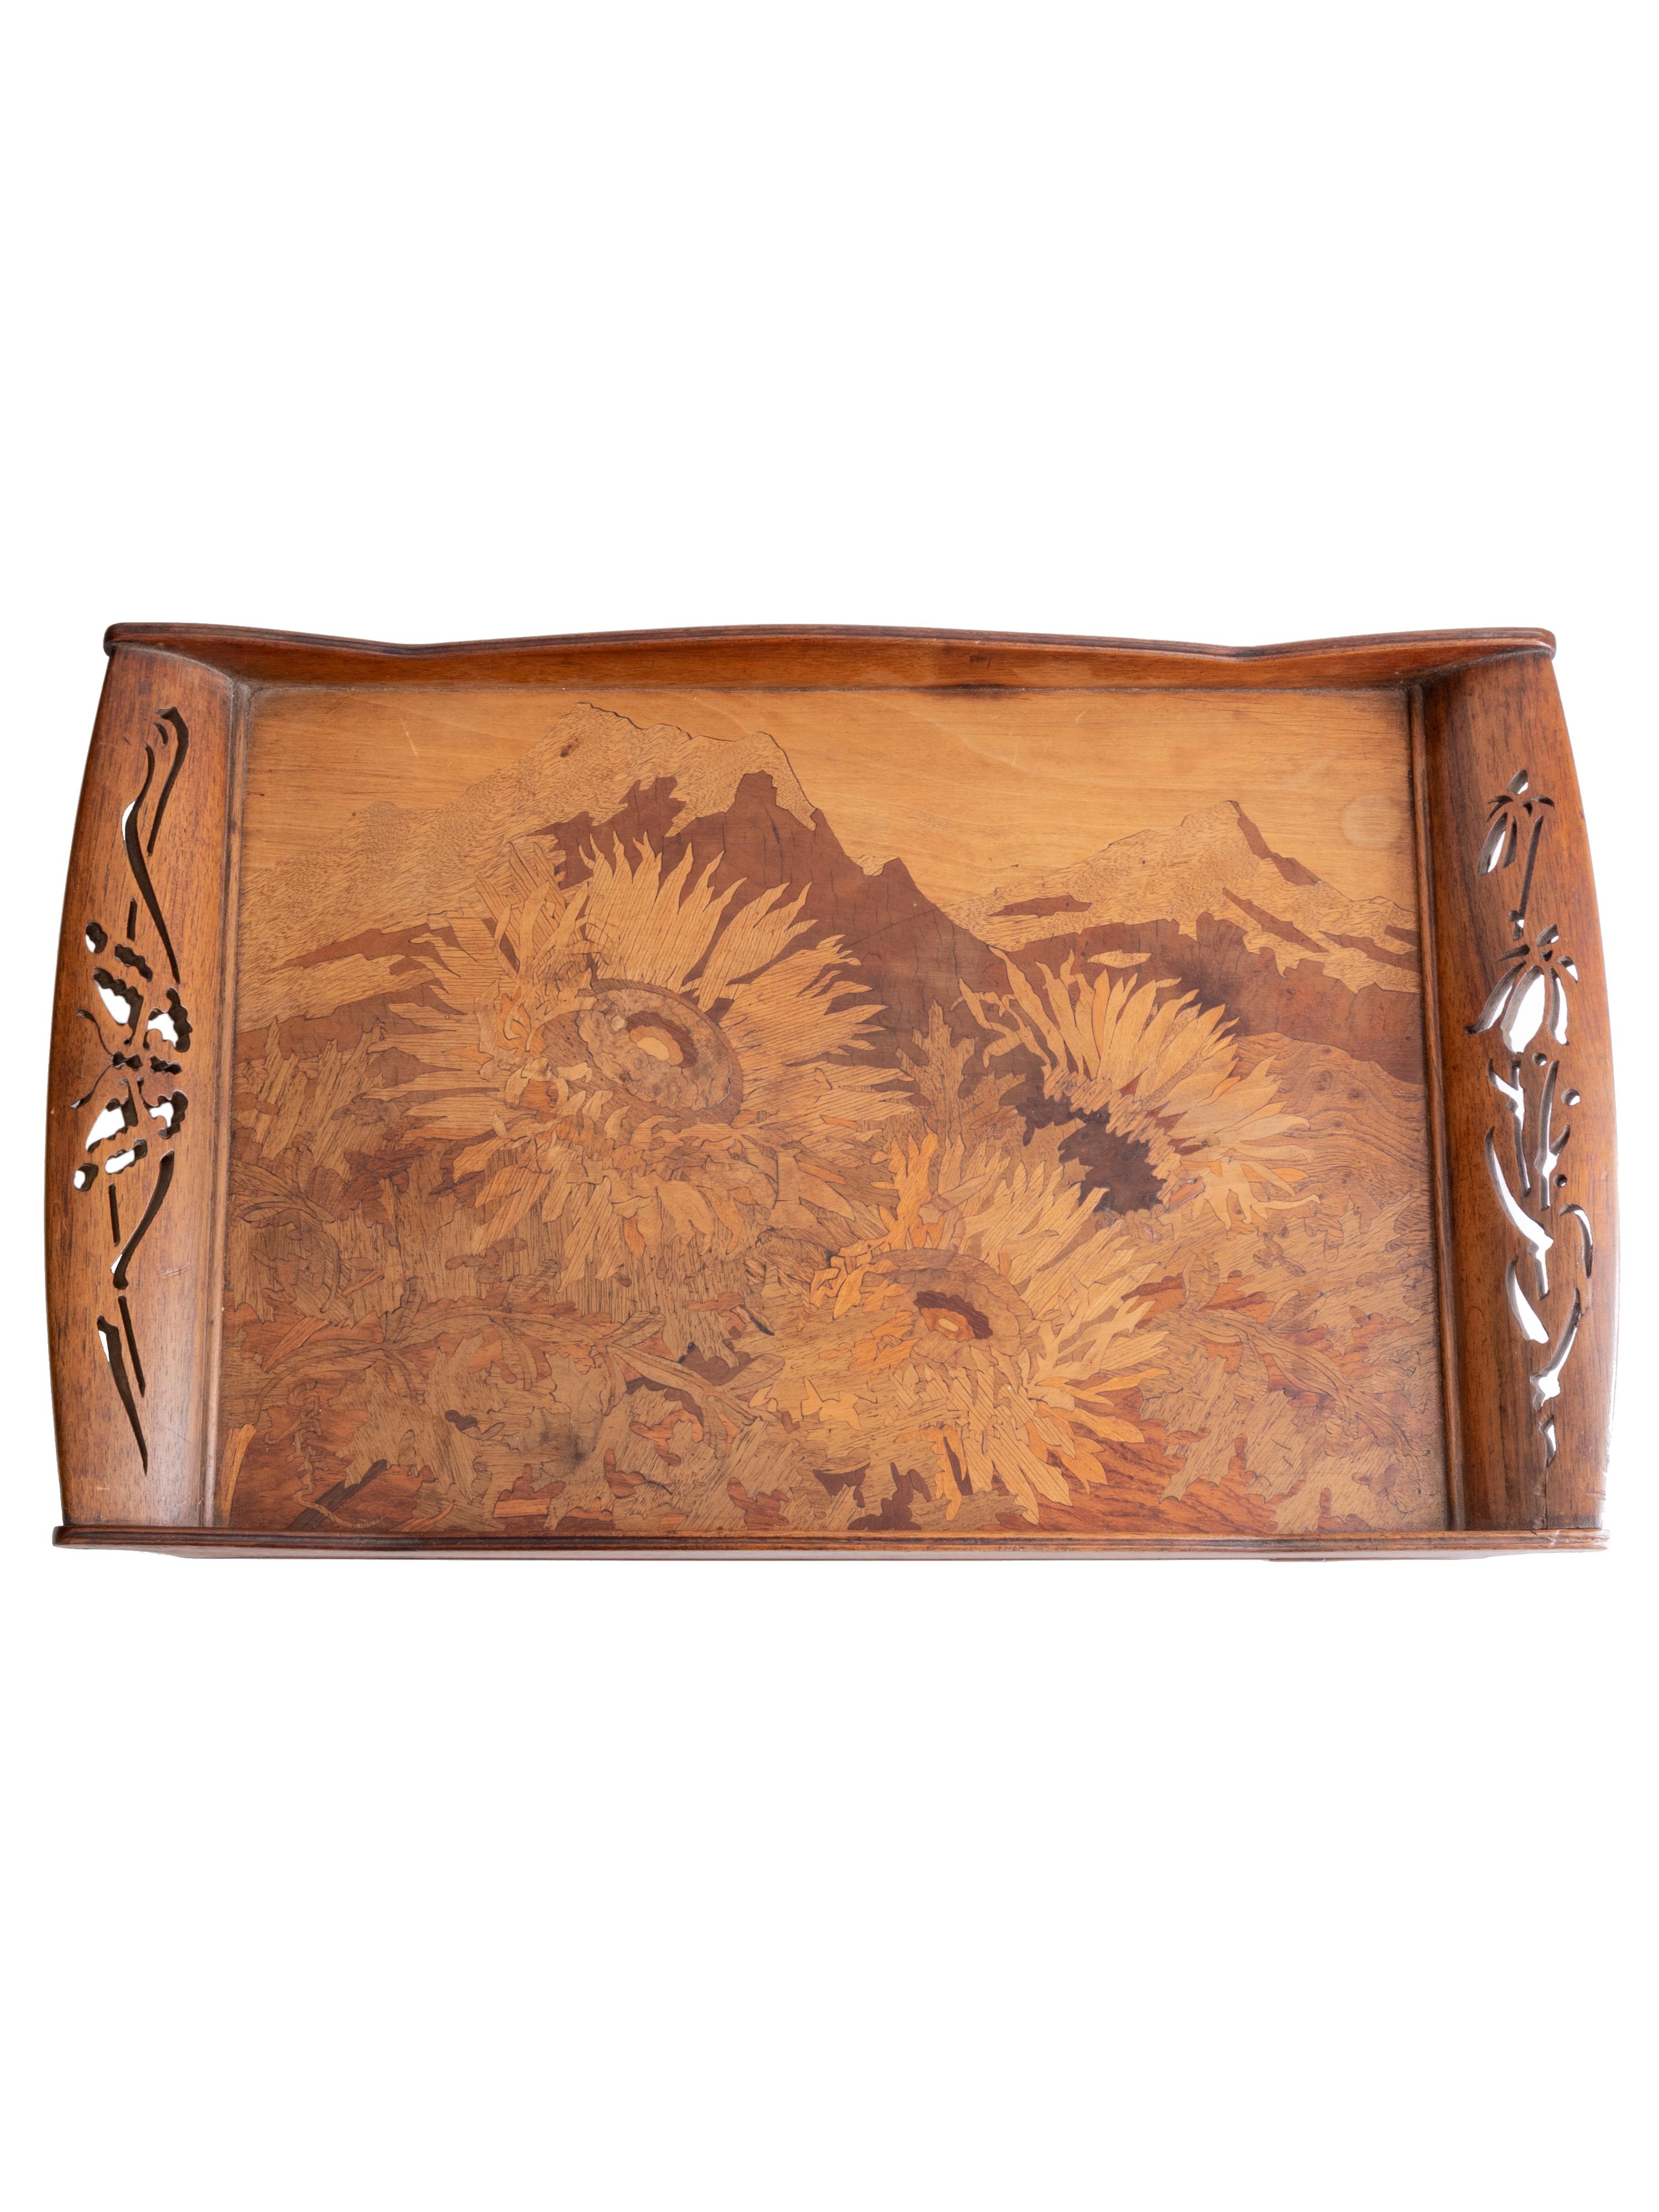 A rectangular inlaid sunflowers tray with raised Art Nouveau edges.
A carved masterpiece by Emille Gallé.
Signed 'Gallé'.
